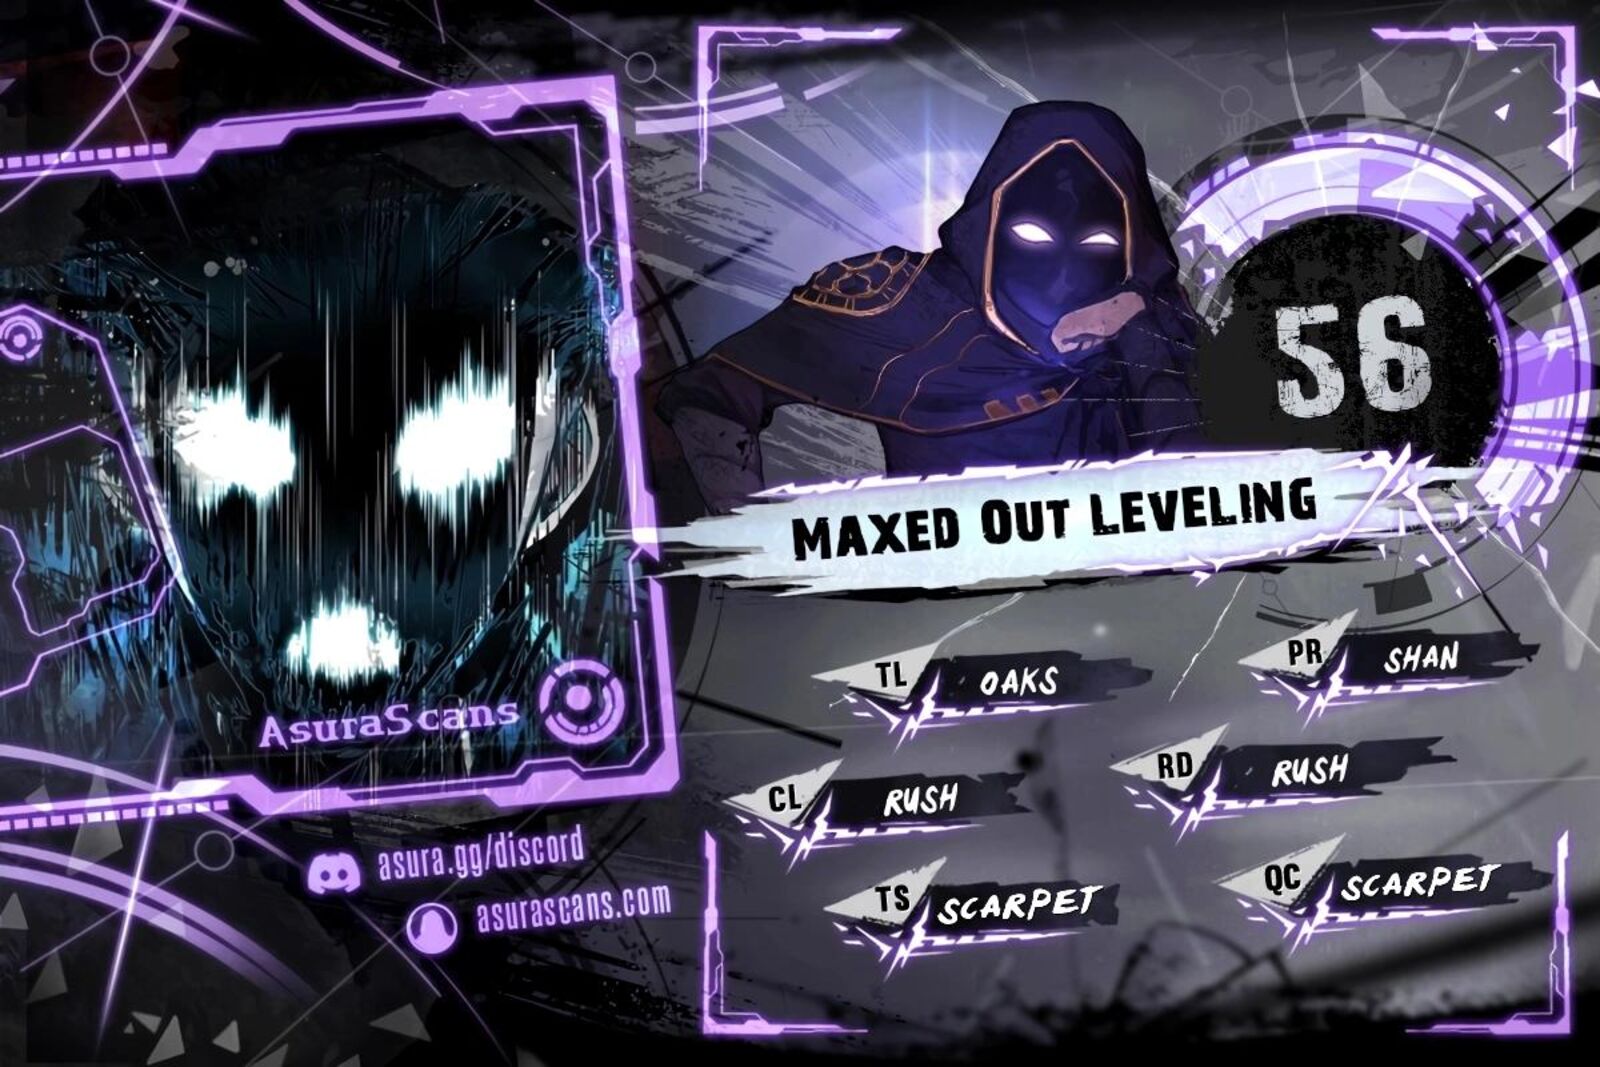 Maxed Out Leveling 56 1